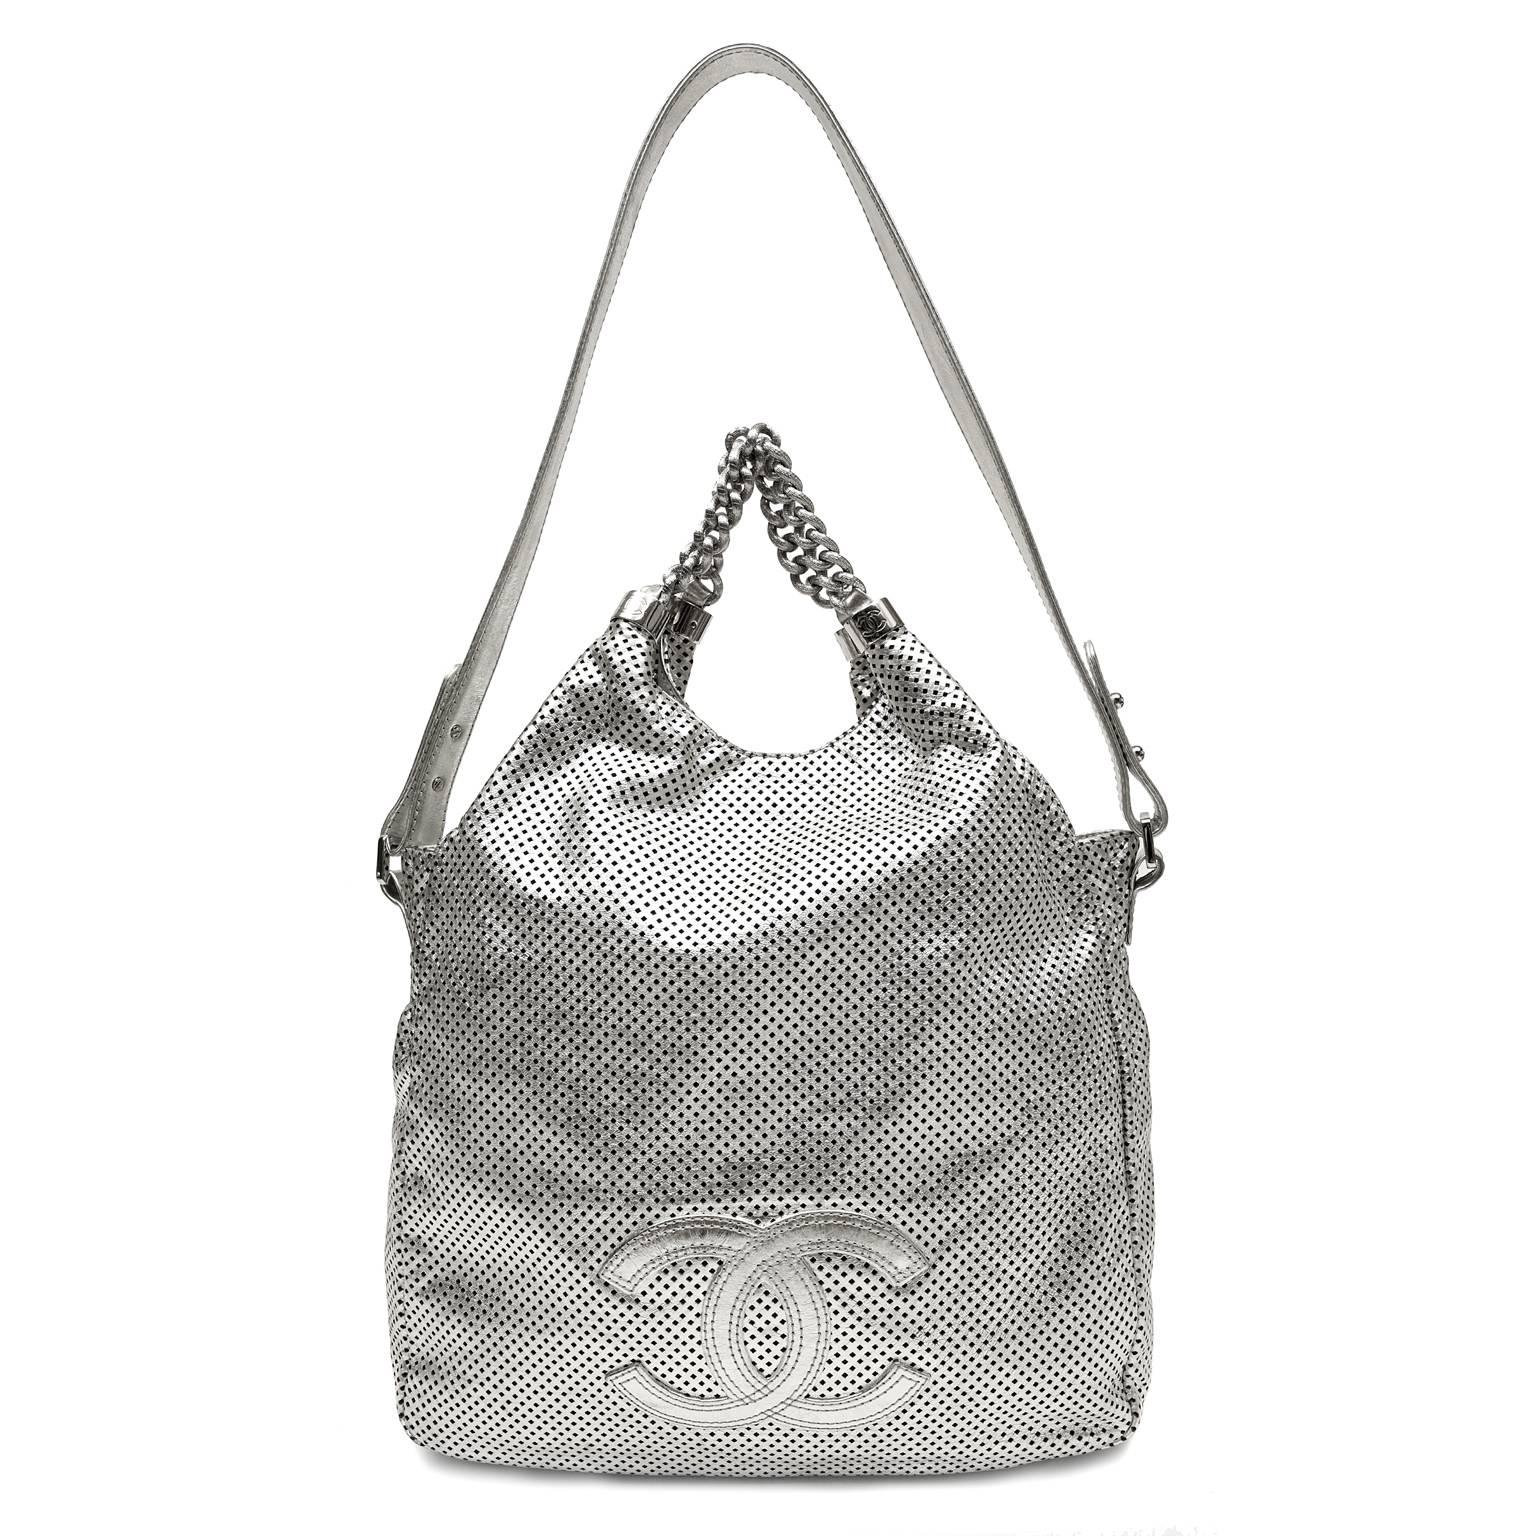 Chanel Silver Perforated Leather Rodeo Drive Large Hobo